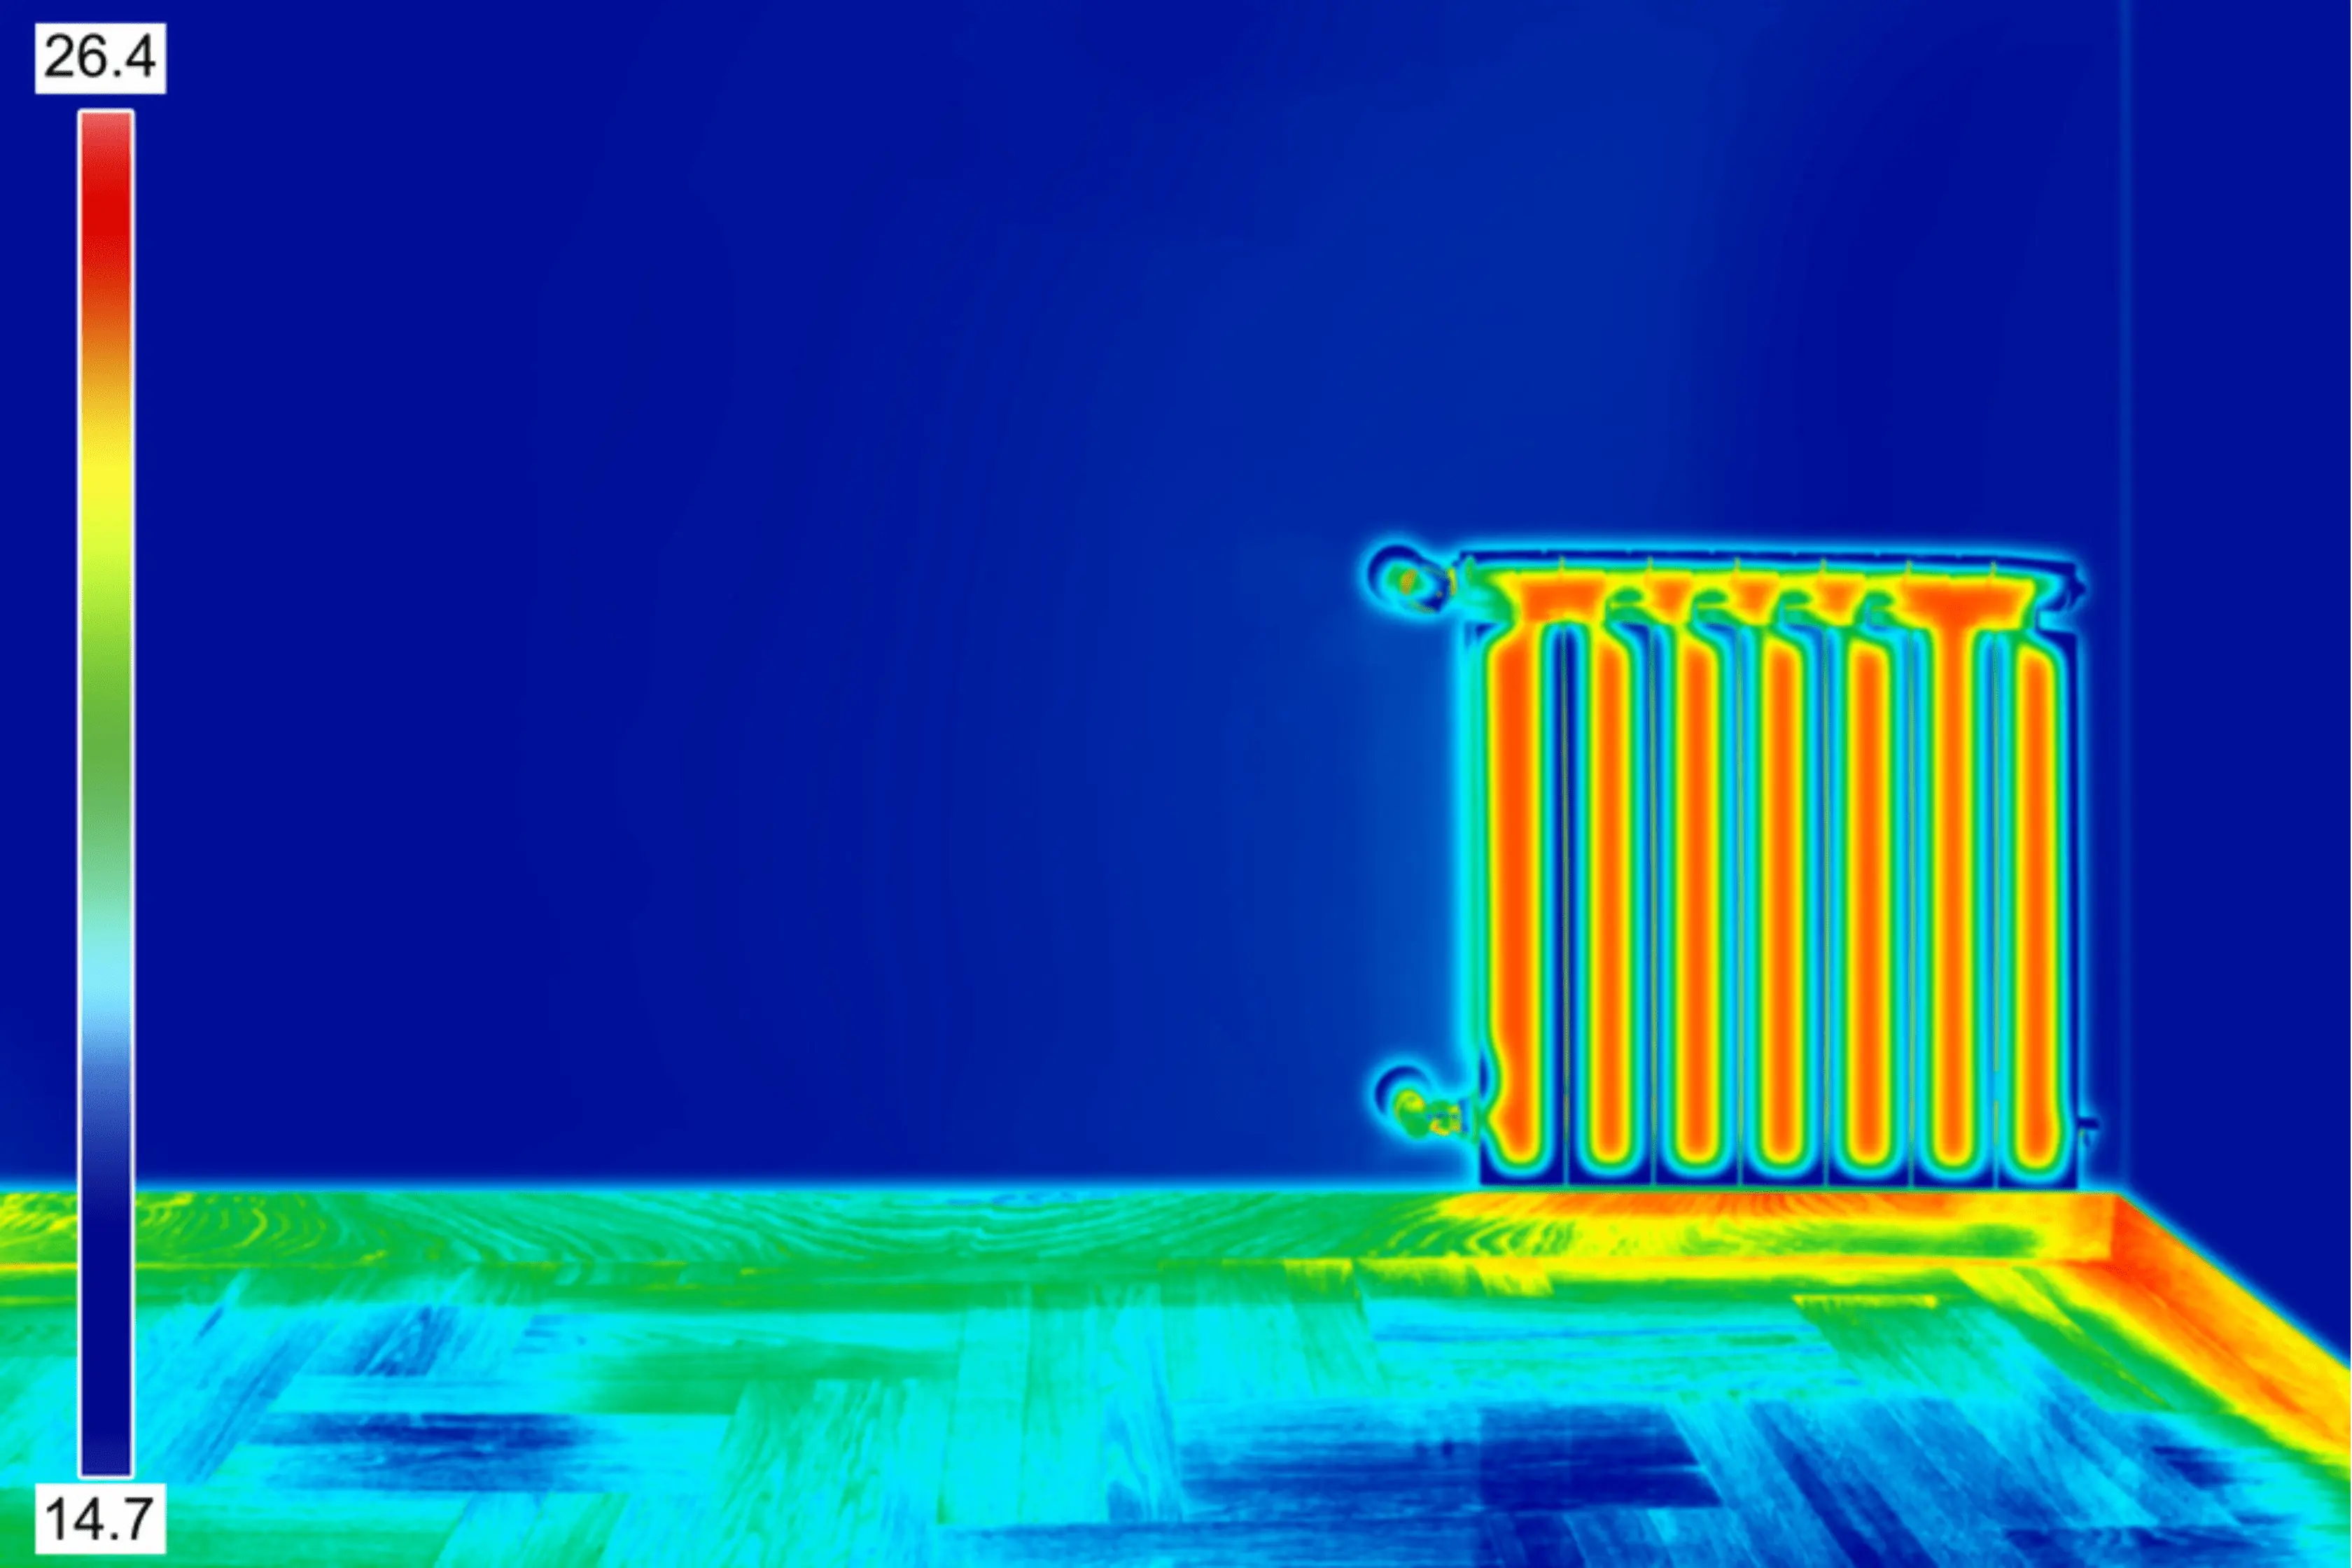 Thermal Vision On Leaking Radiator In Home